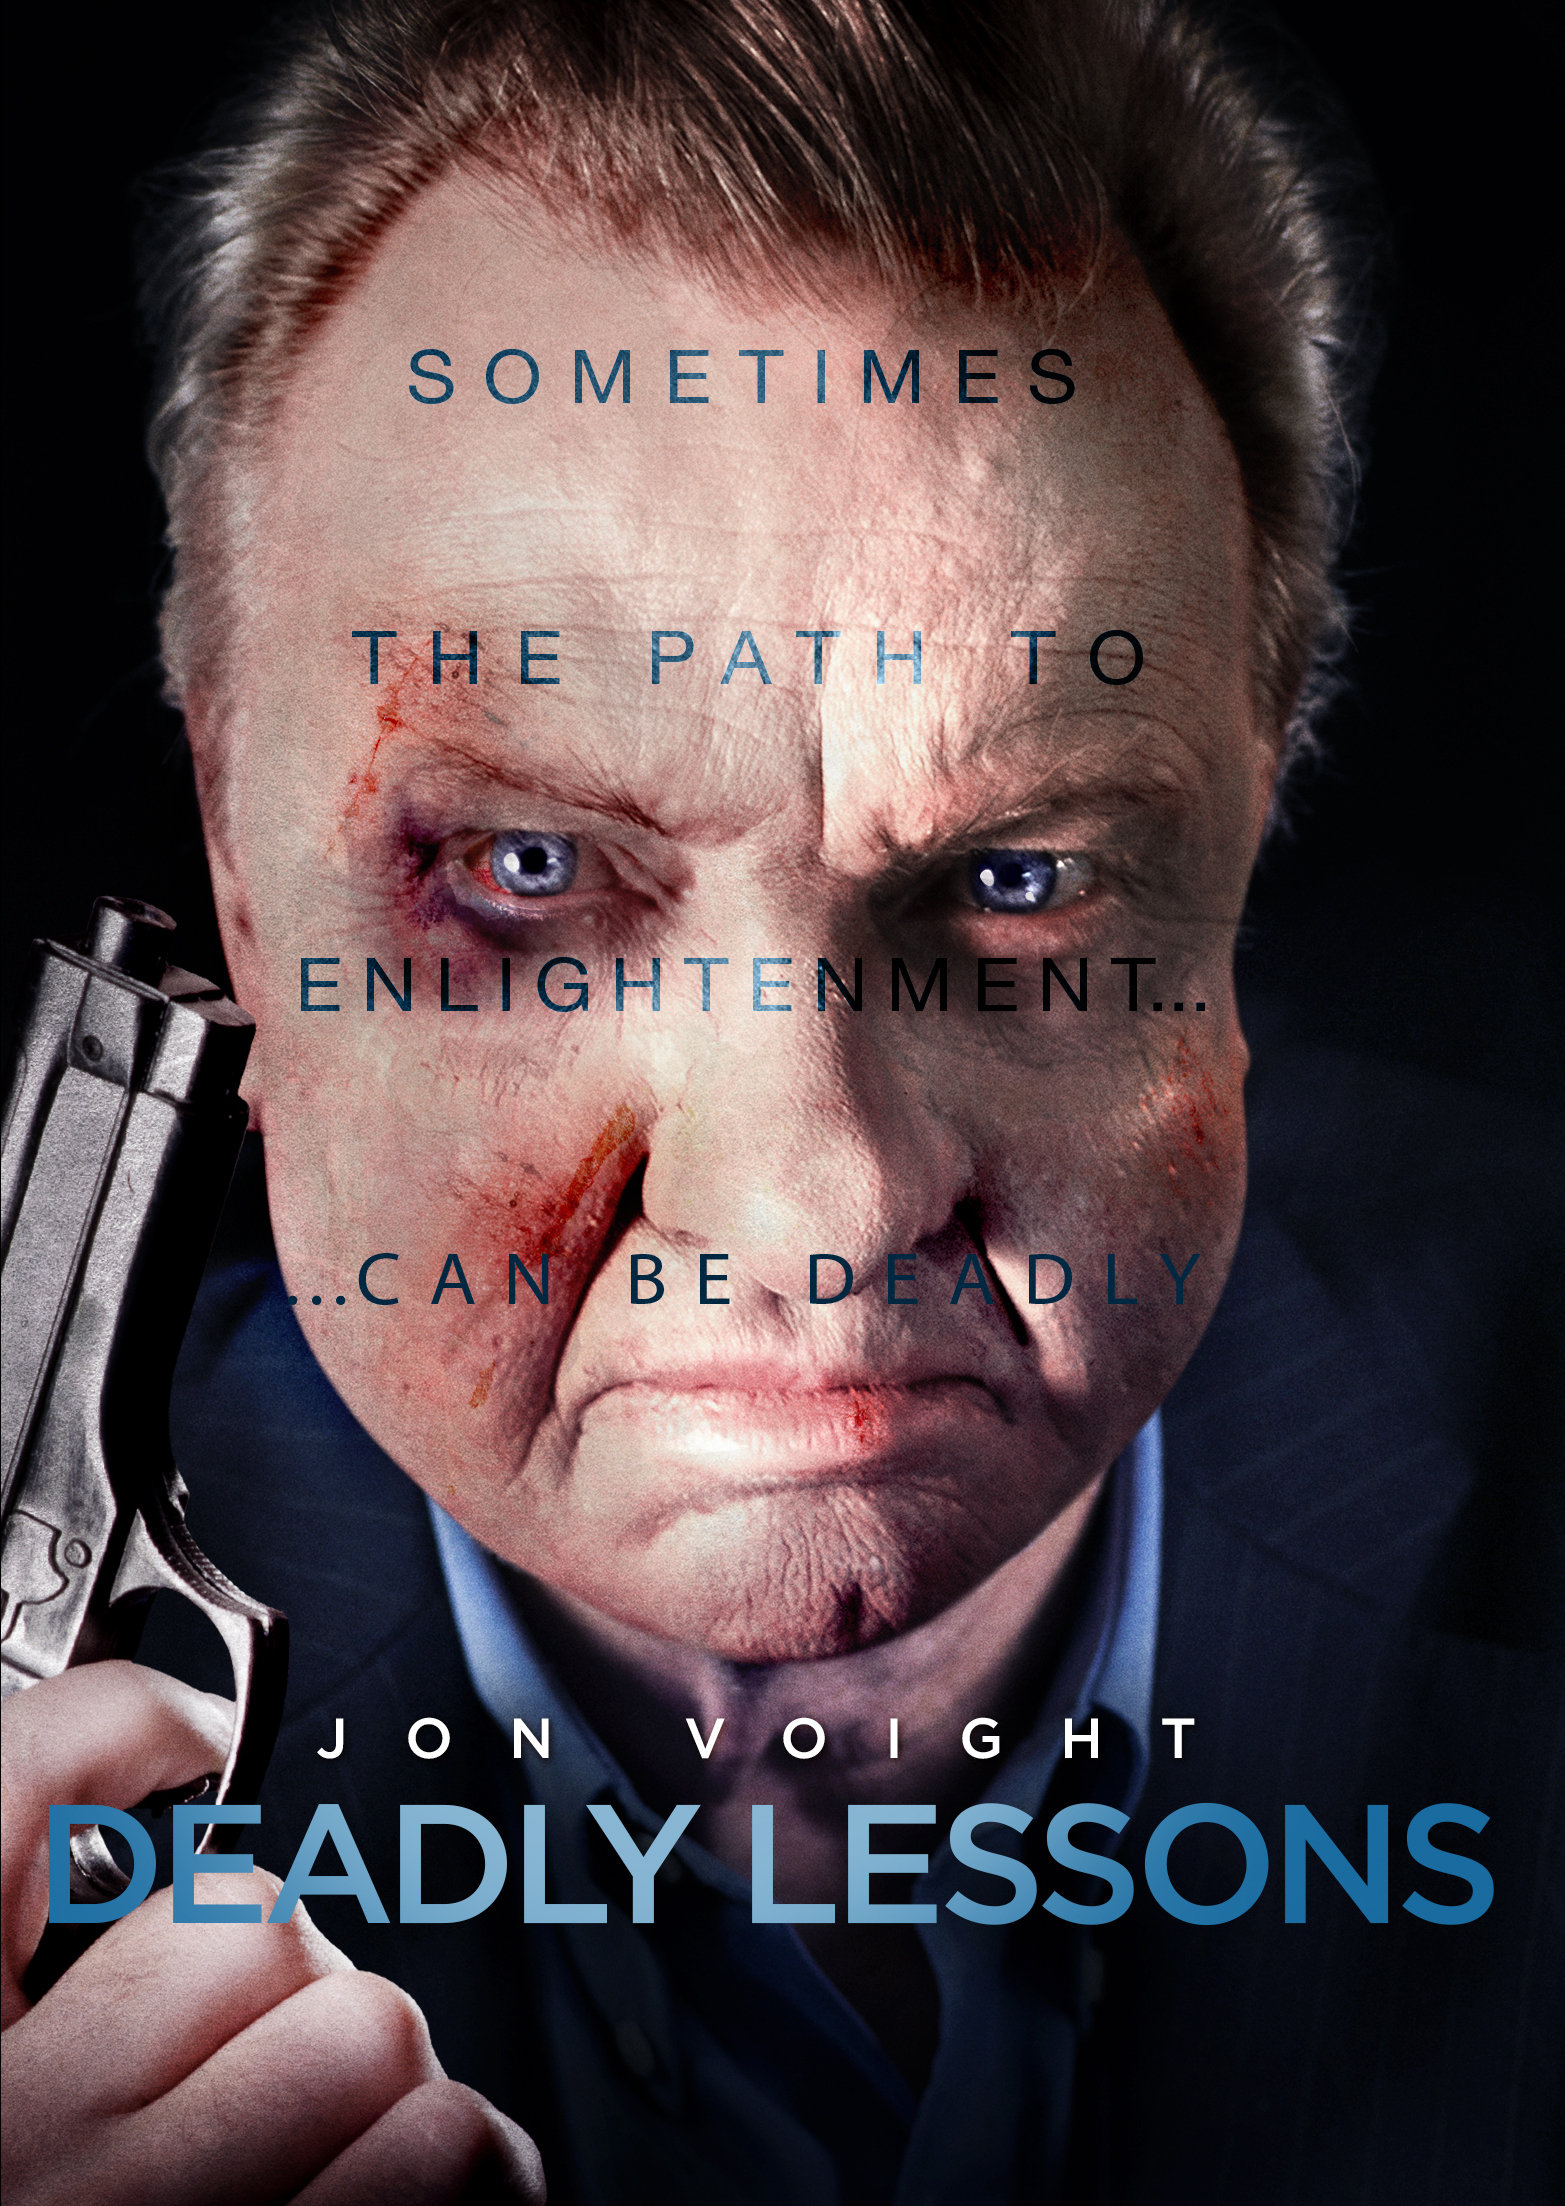 Deadly Lessons (2006) Screenshot 4